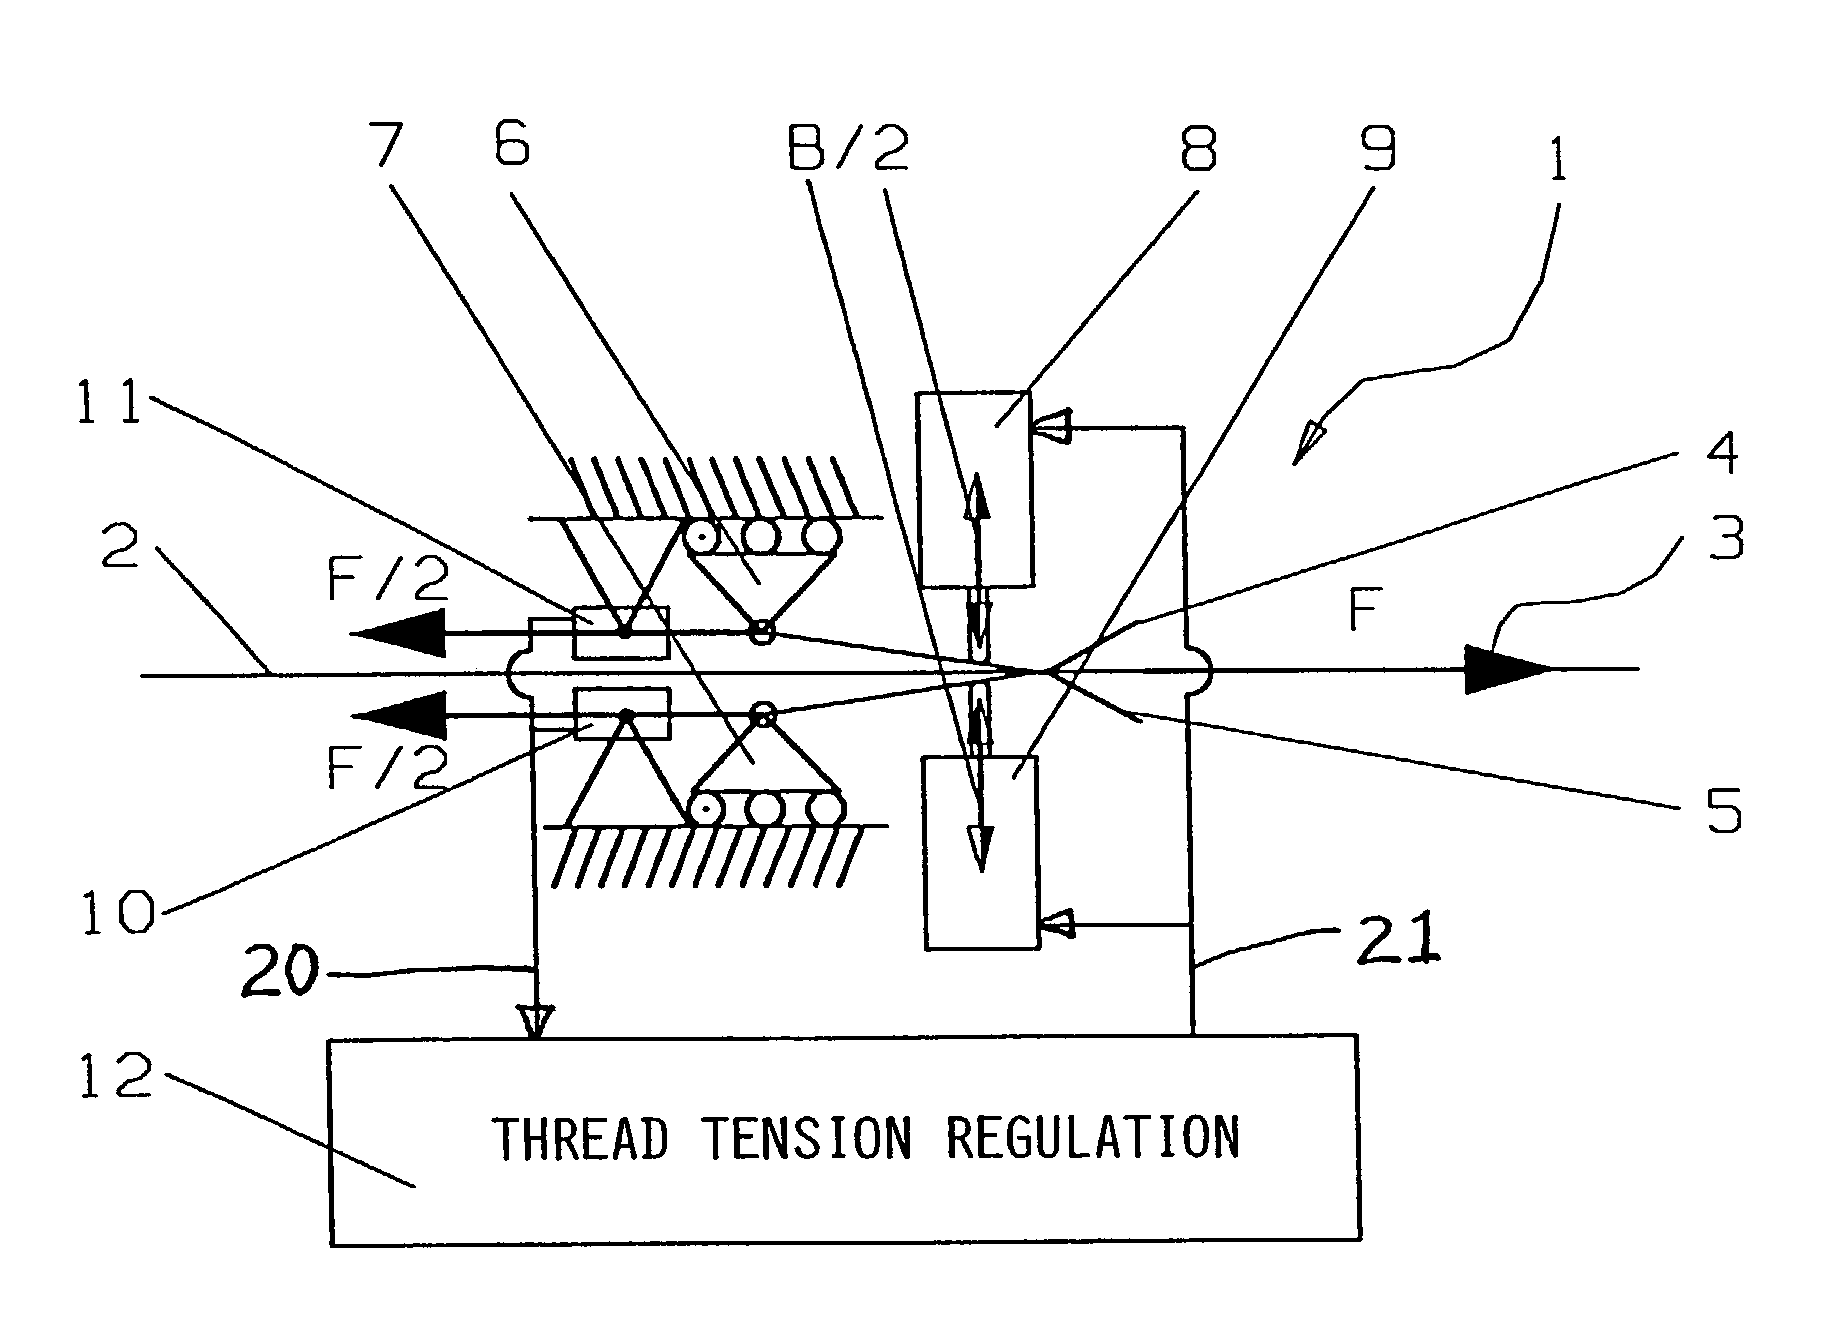 Thread tension regulation in a thread brake device and method in a textile processing machine